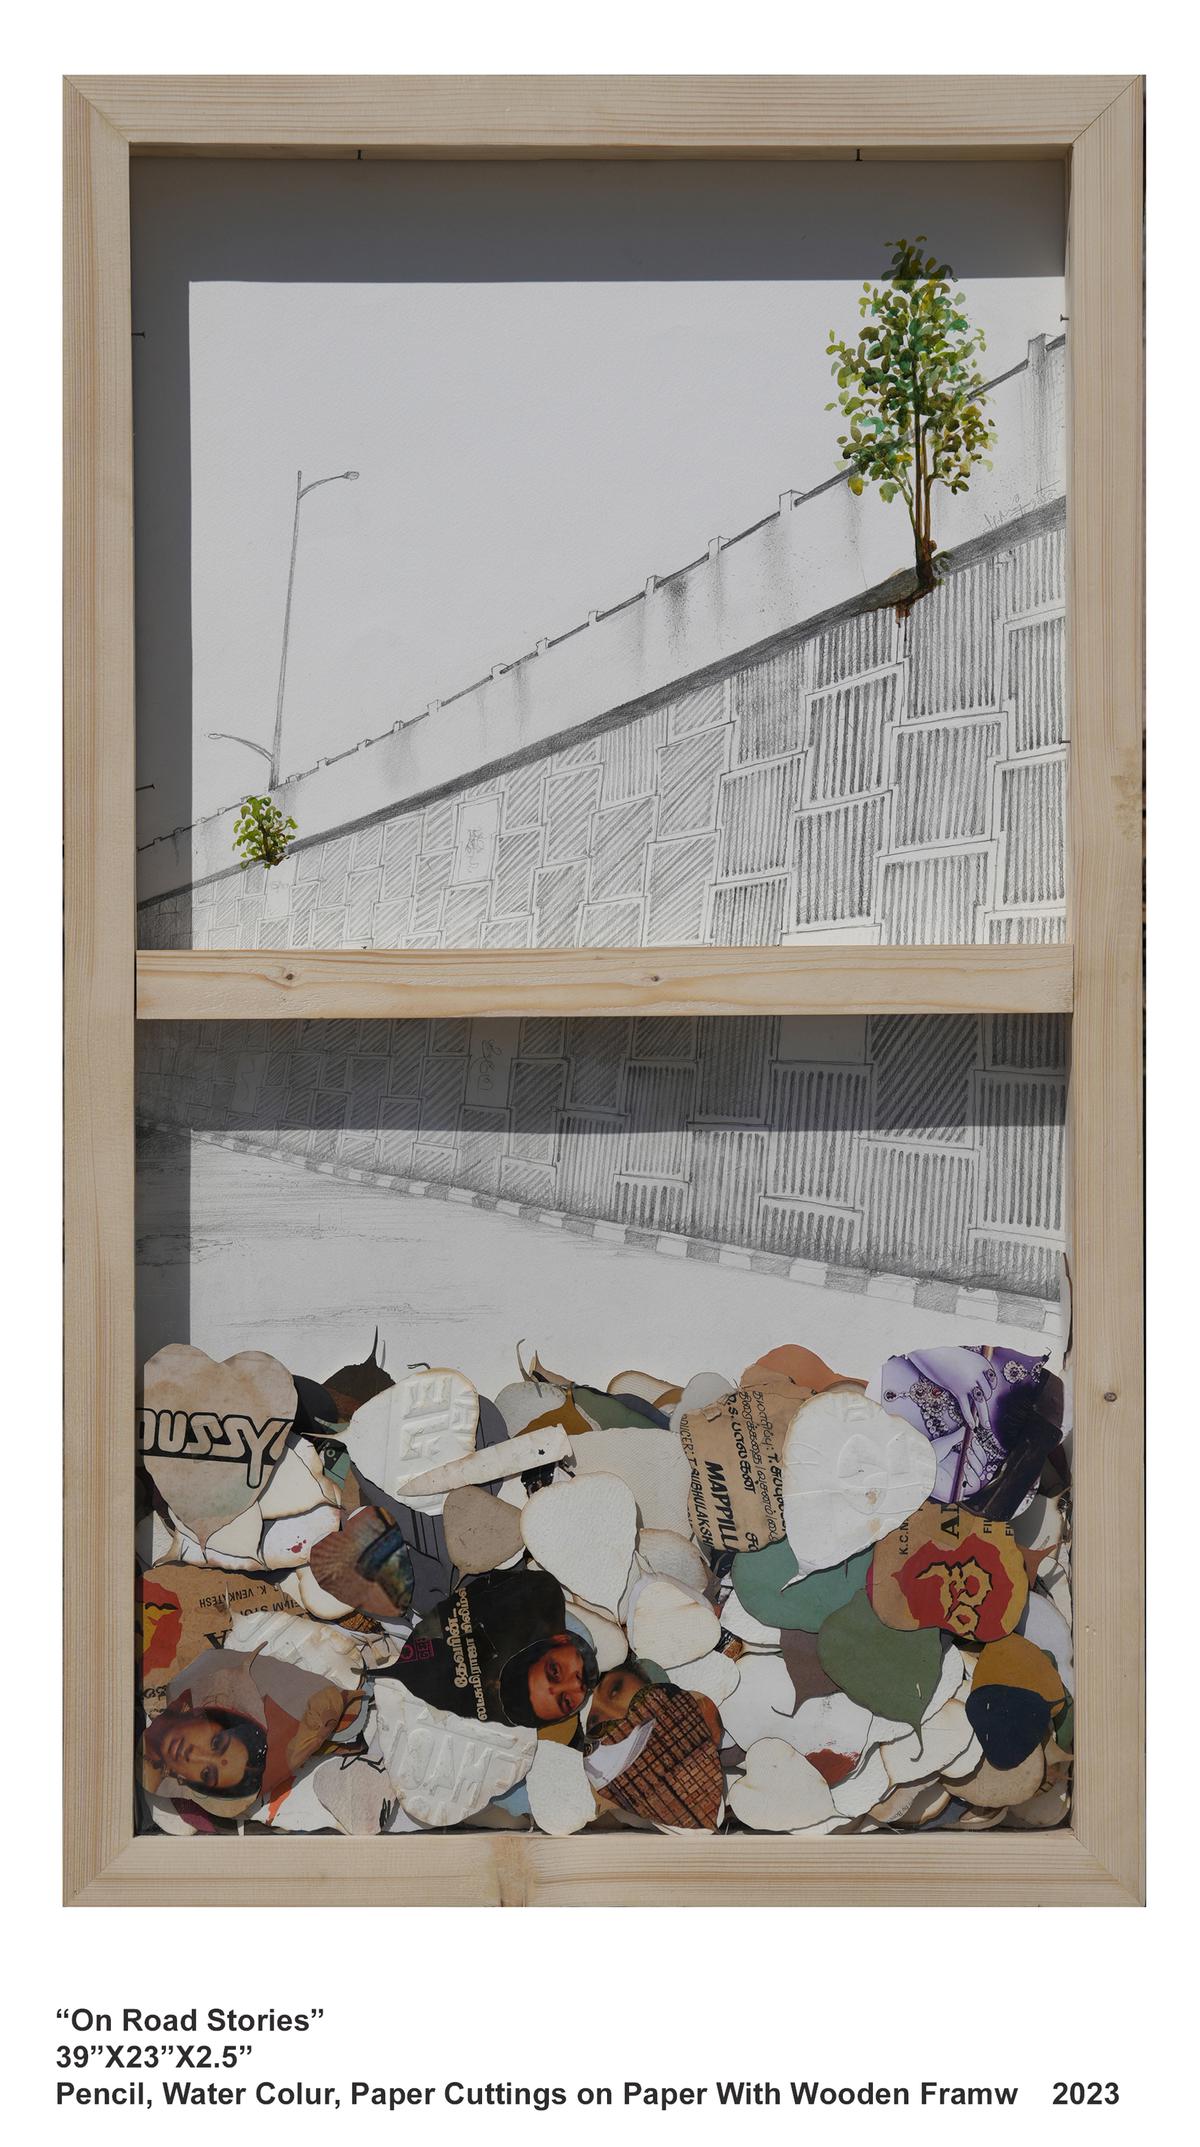 On Road Stories from the Art of Reconstruction series by artist Manjunath Honappura 